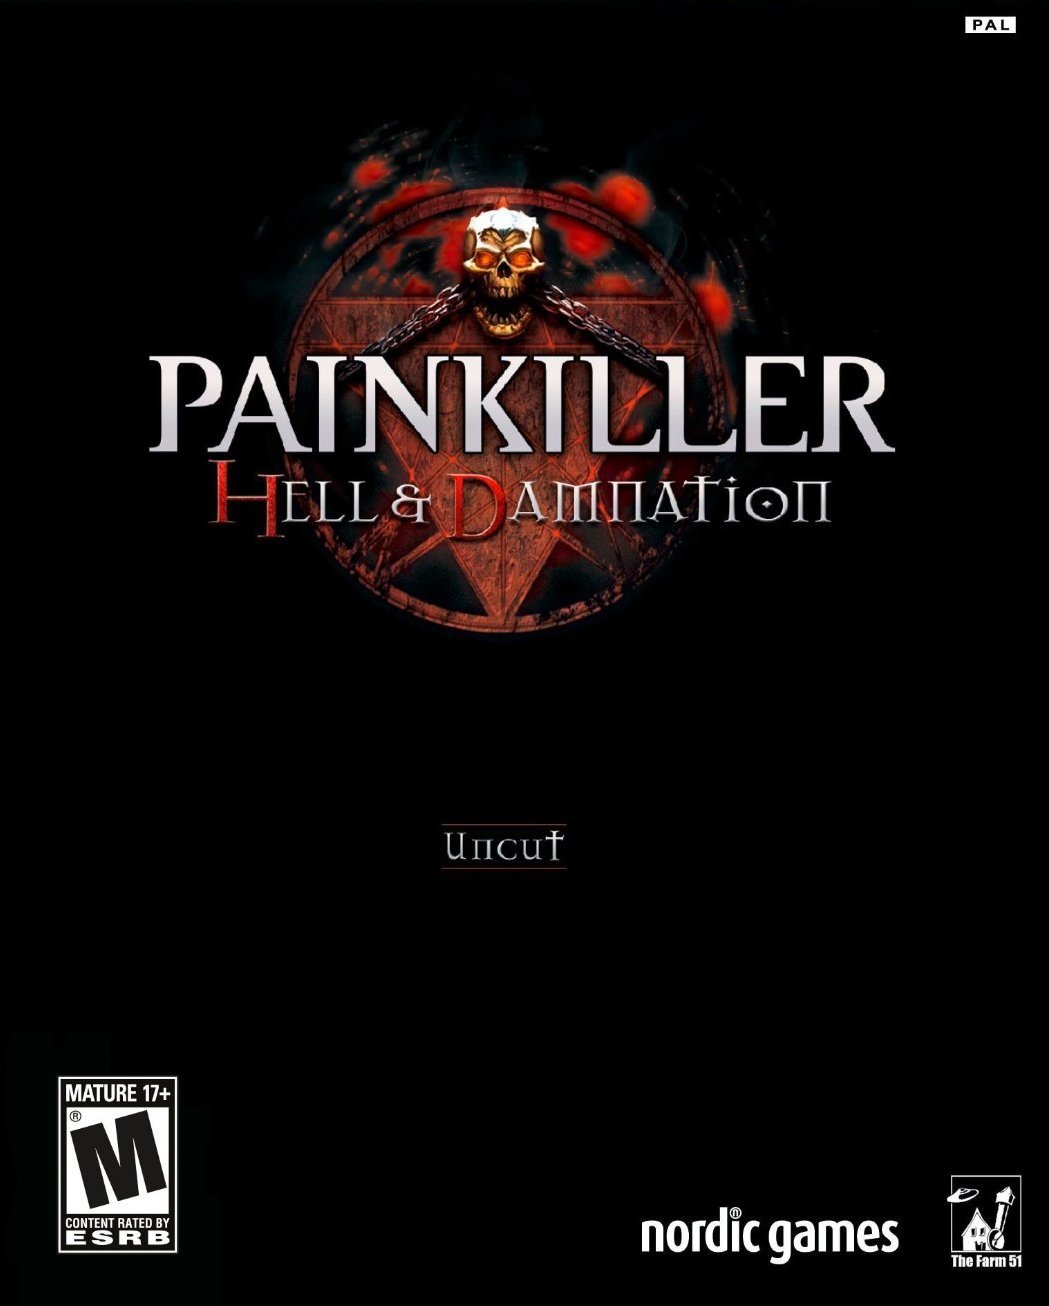 Image of Painkiller: Hell & Damnation